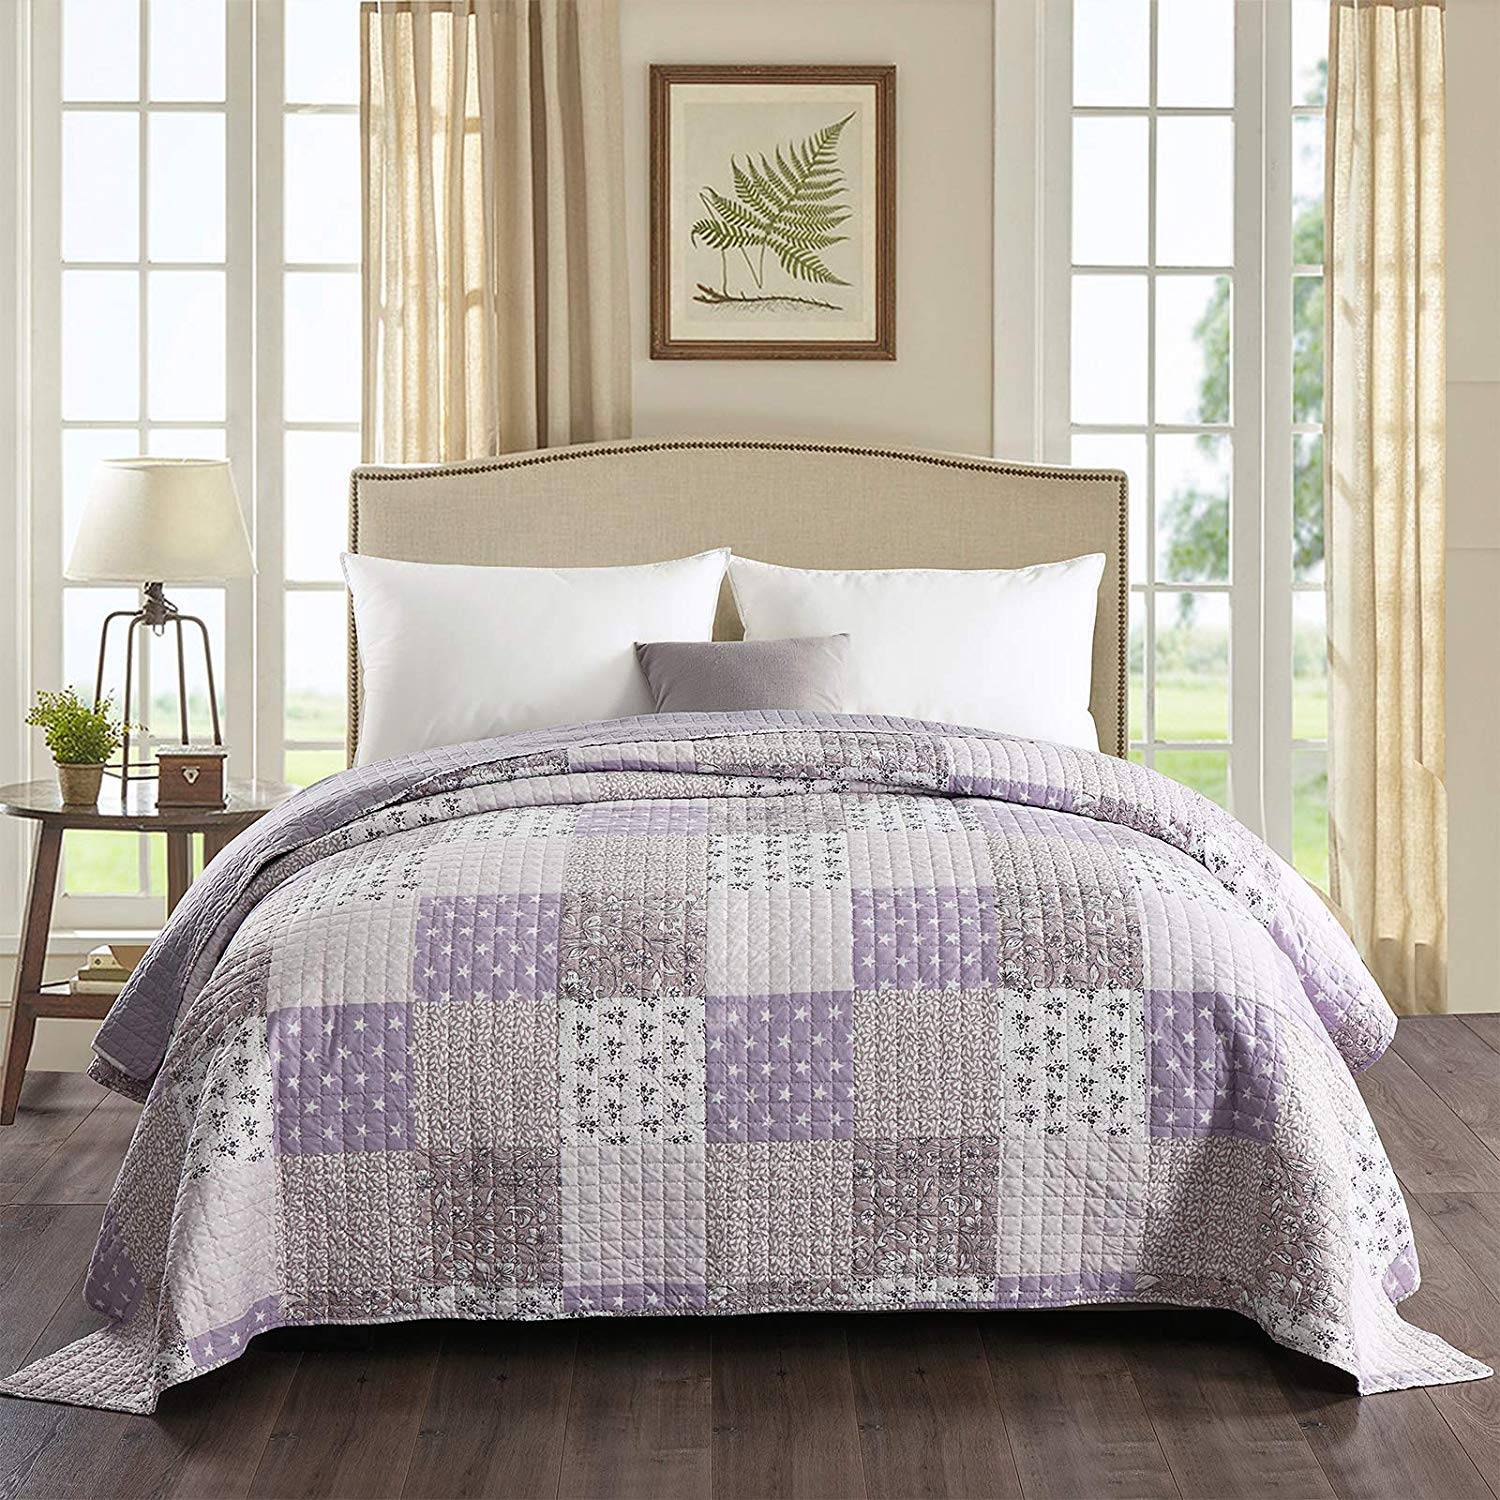 Bedspread Quilted Patchwork Bed Throw Blanket Lightweight